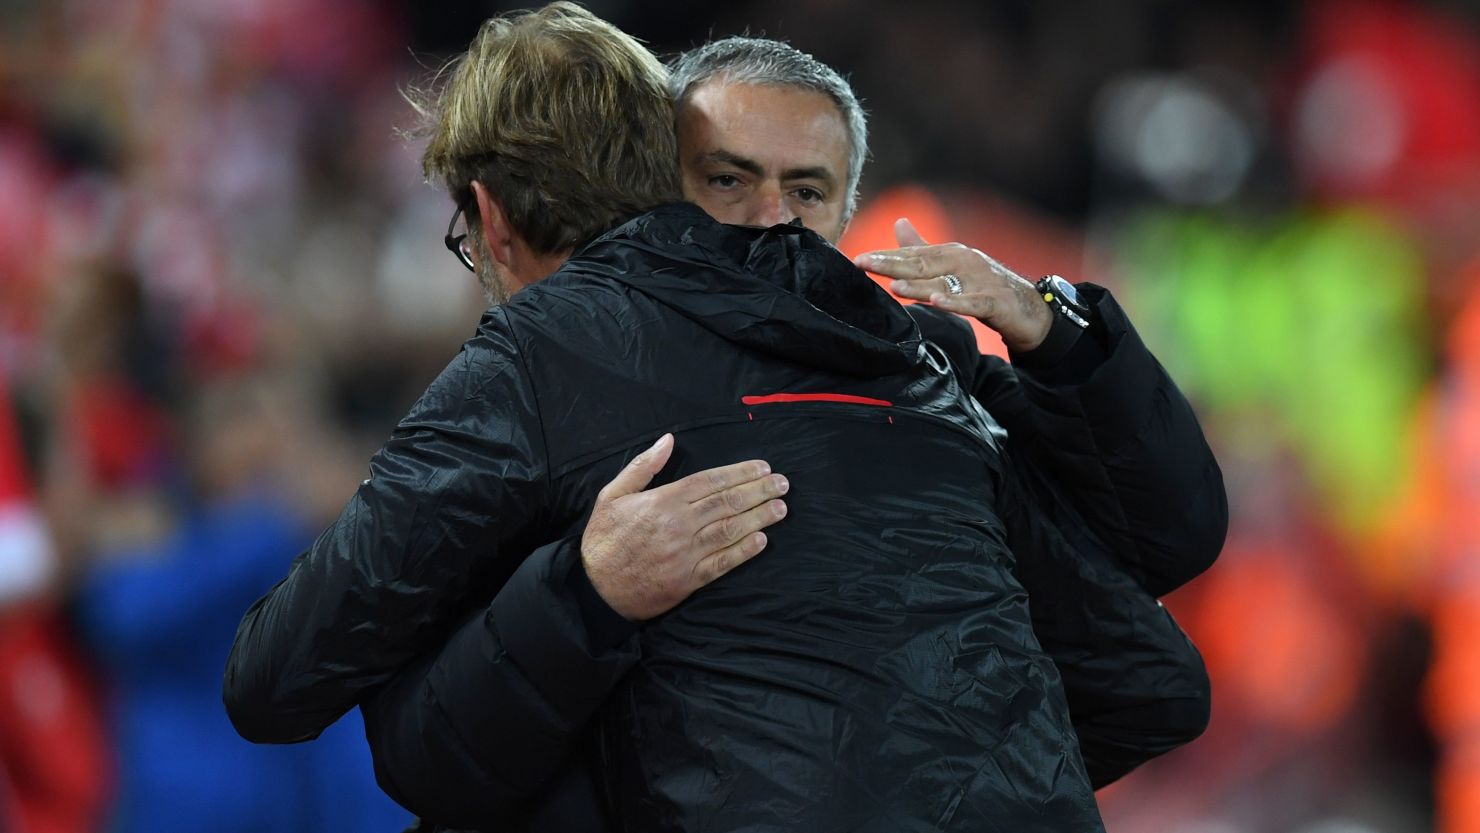 Jose Mourinho and Jurgen Klopp watched their sides play out a goalless draw at Anfield.